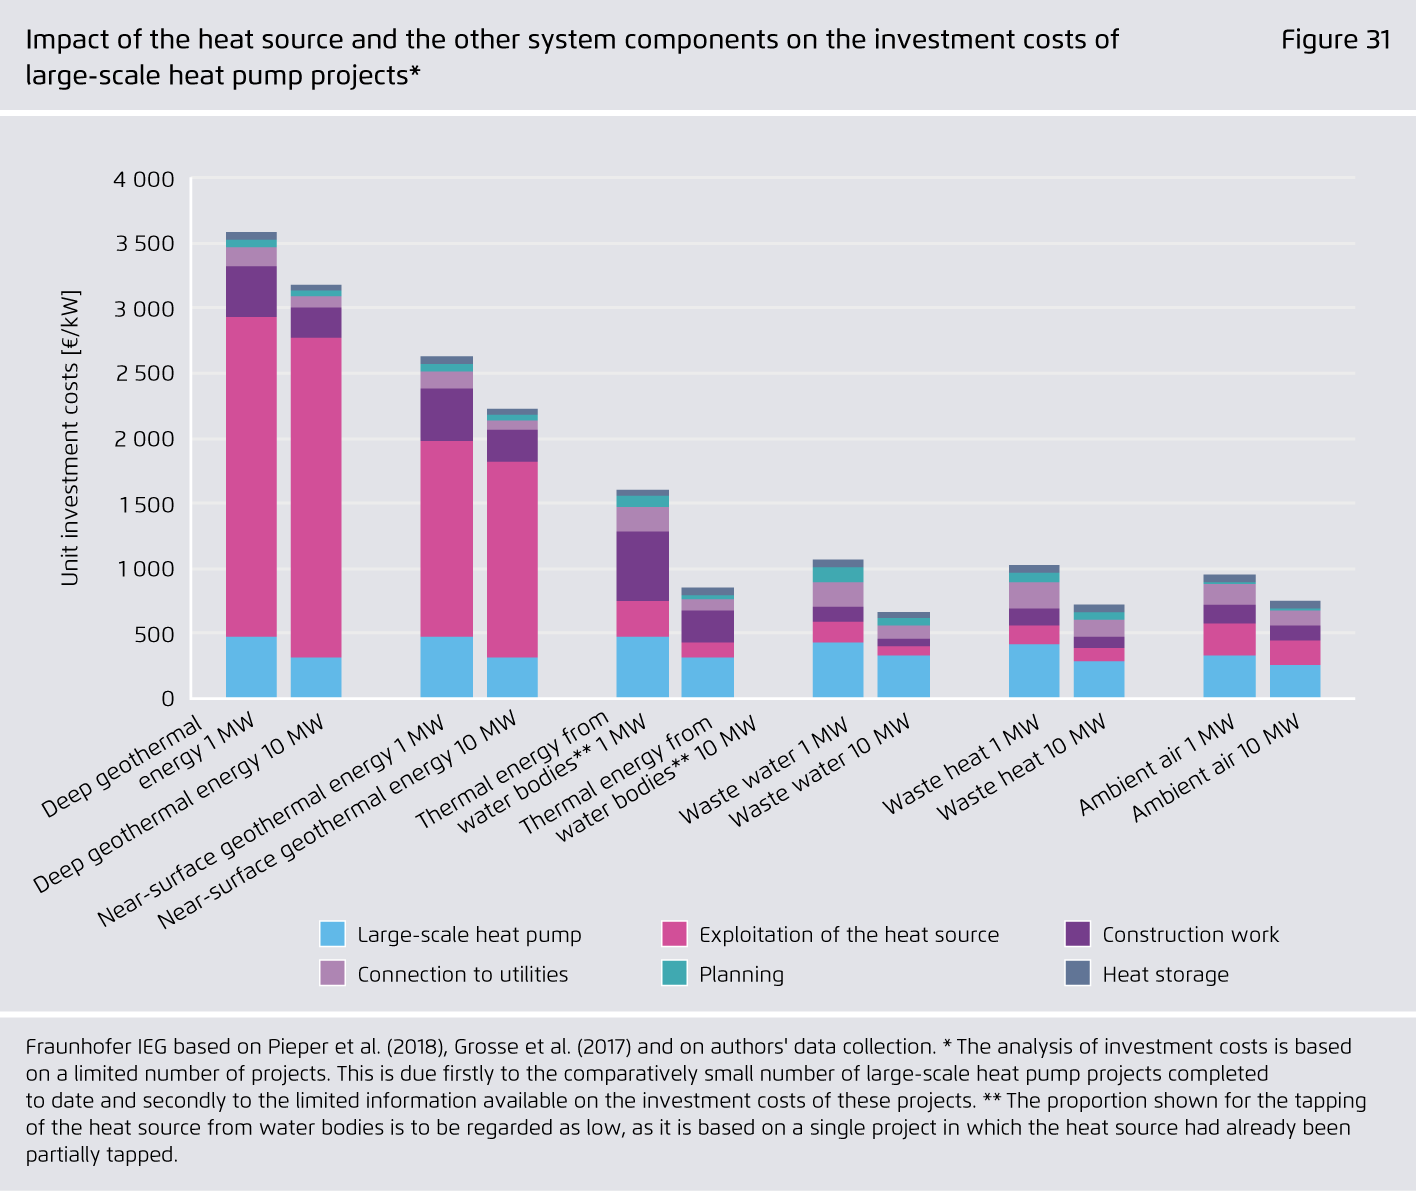 Preview for Impact of the heat source and the other system components on the investment costs of large-scale heat pump projects*